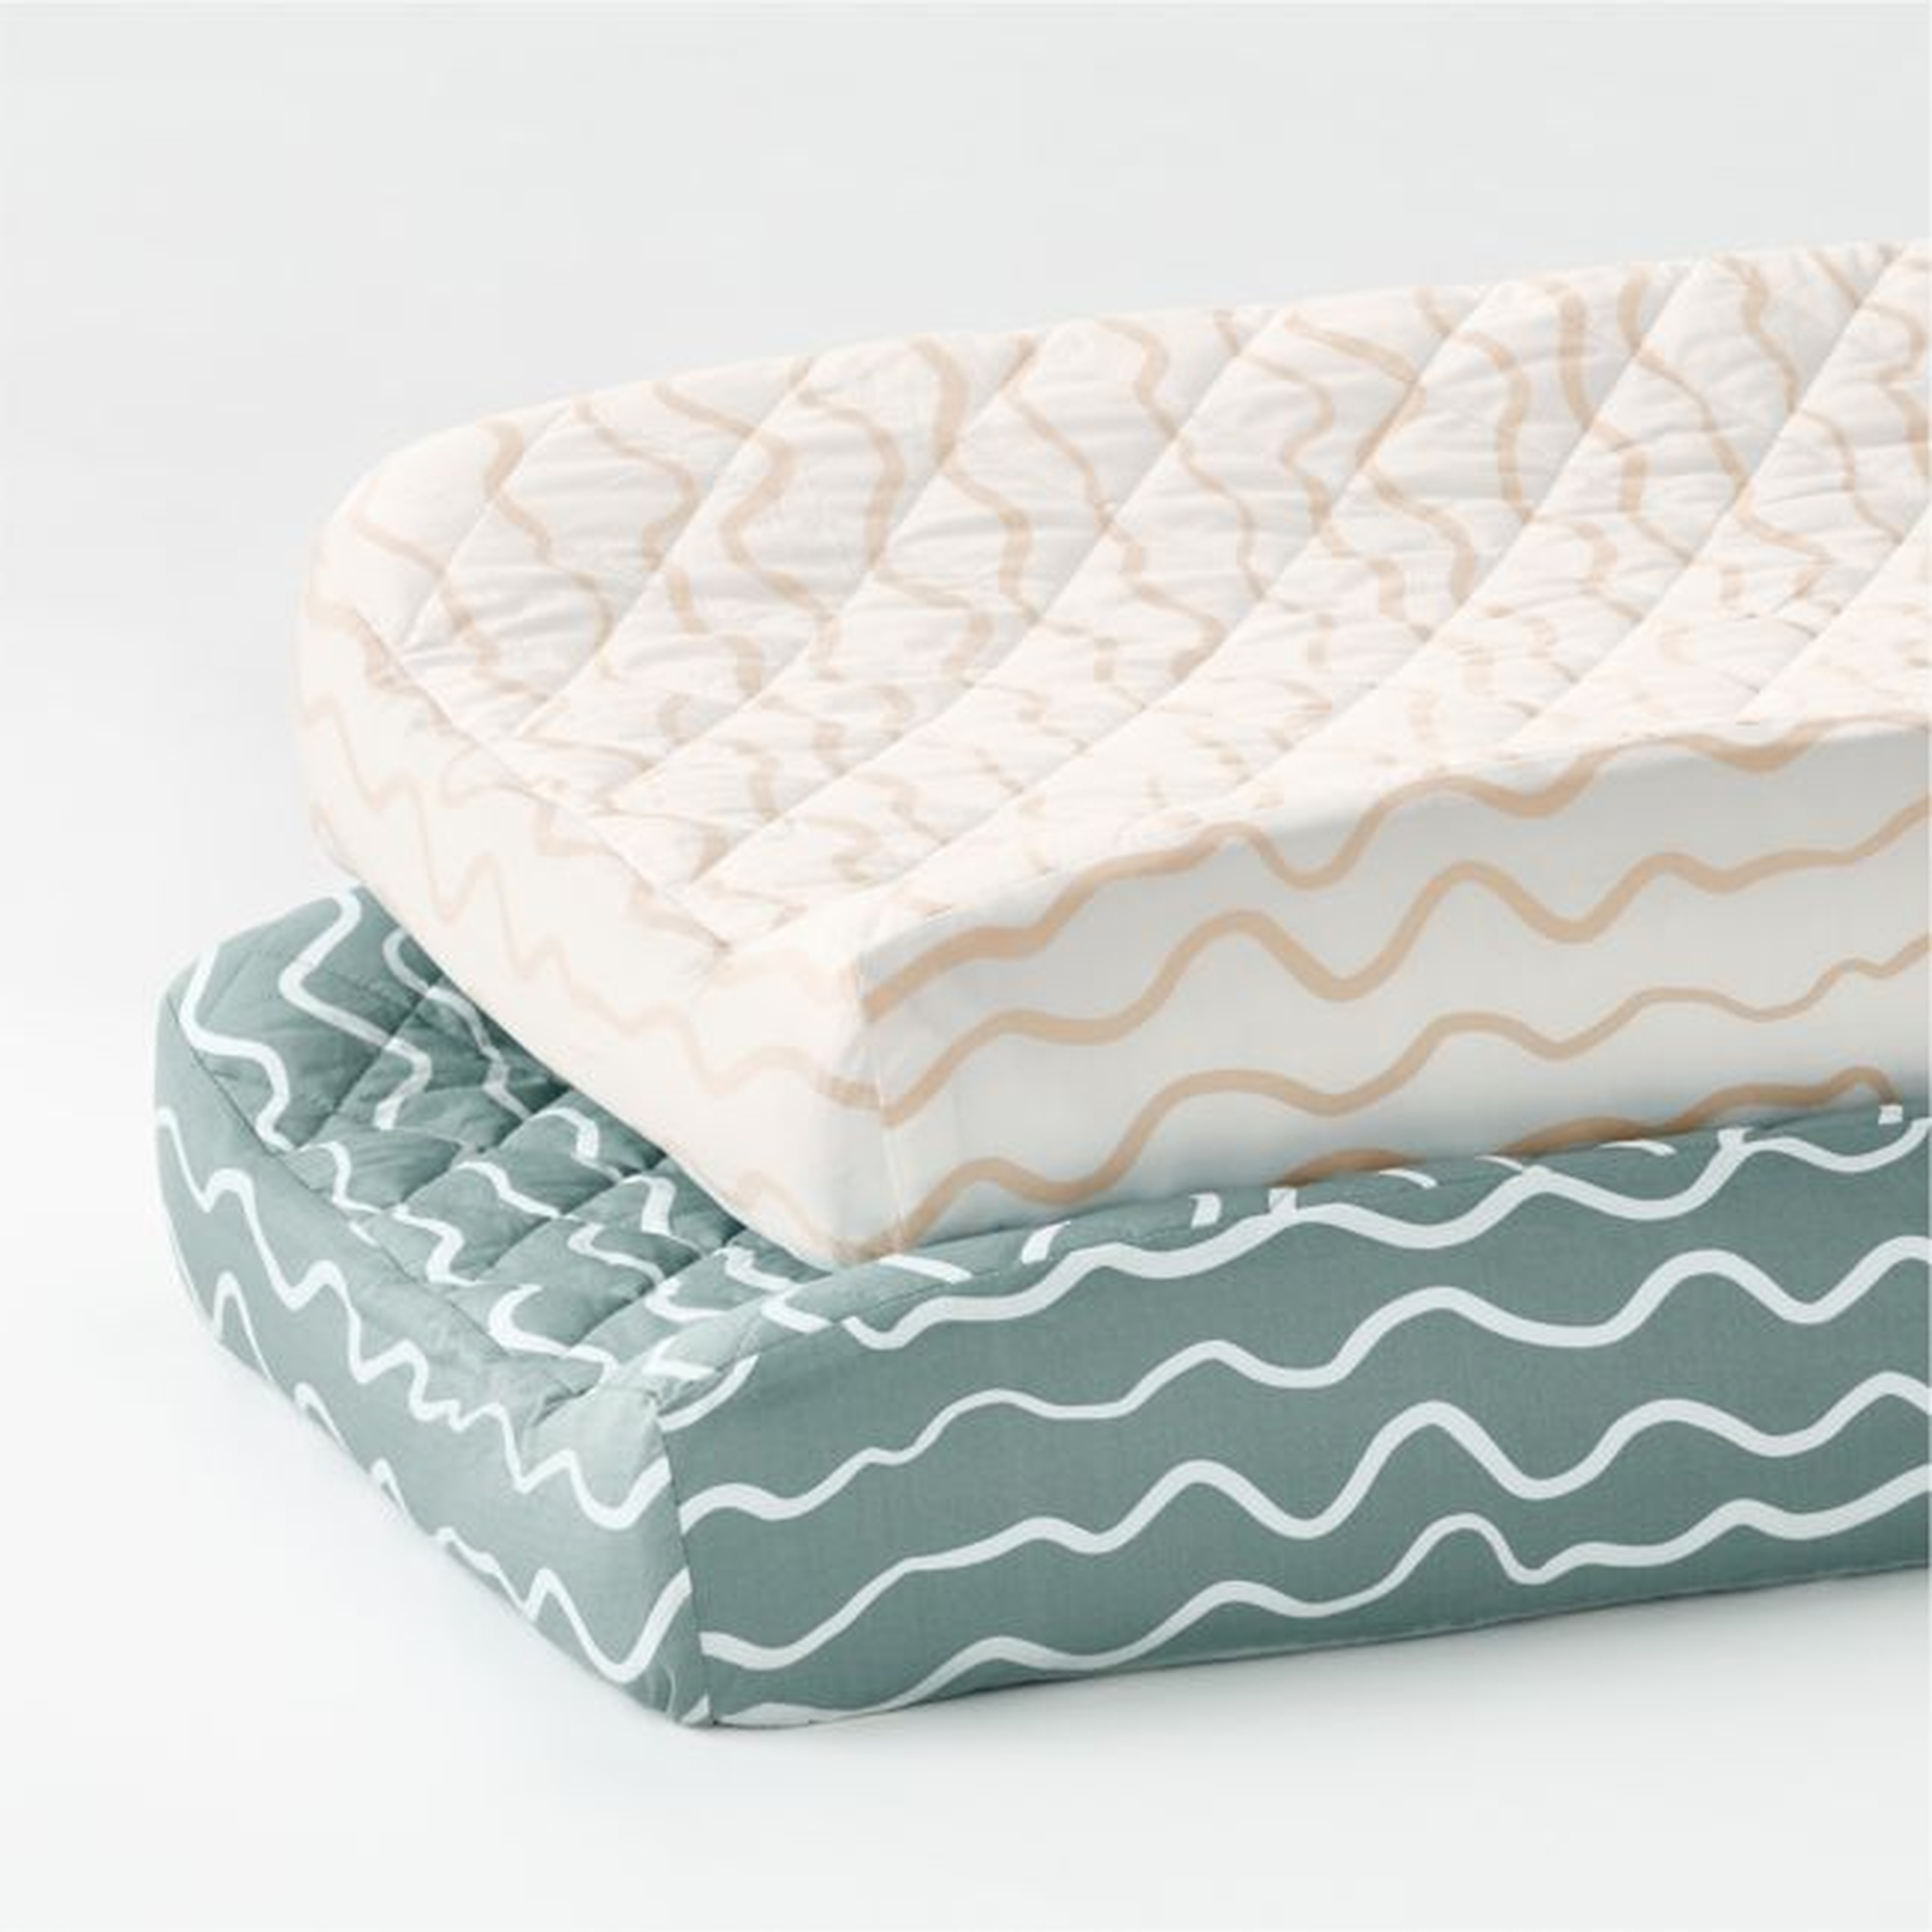 Light Peach and Seafoam Imperfect Stripe Organic Changer Covers, Set of 2 - Crate and Barrel